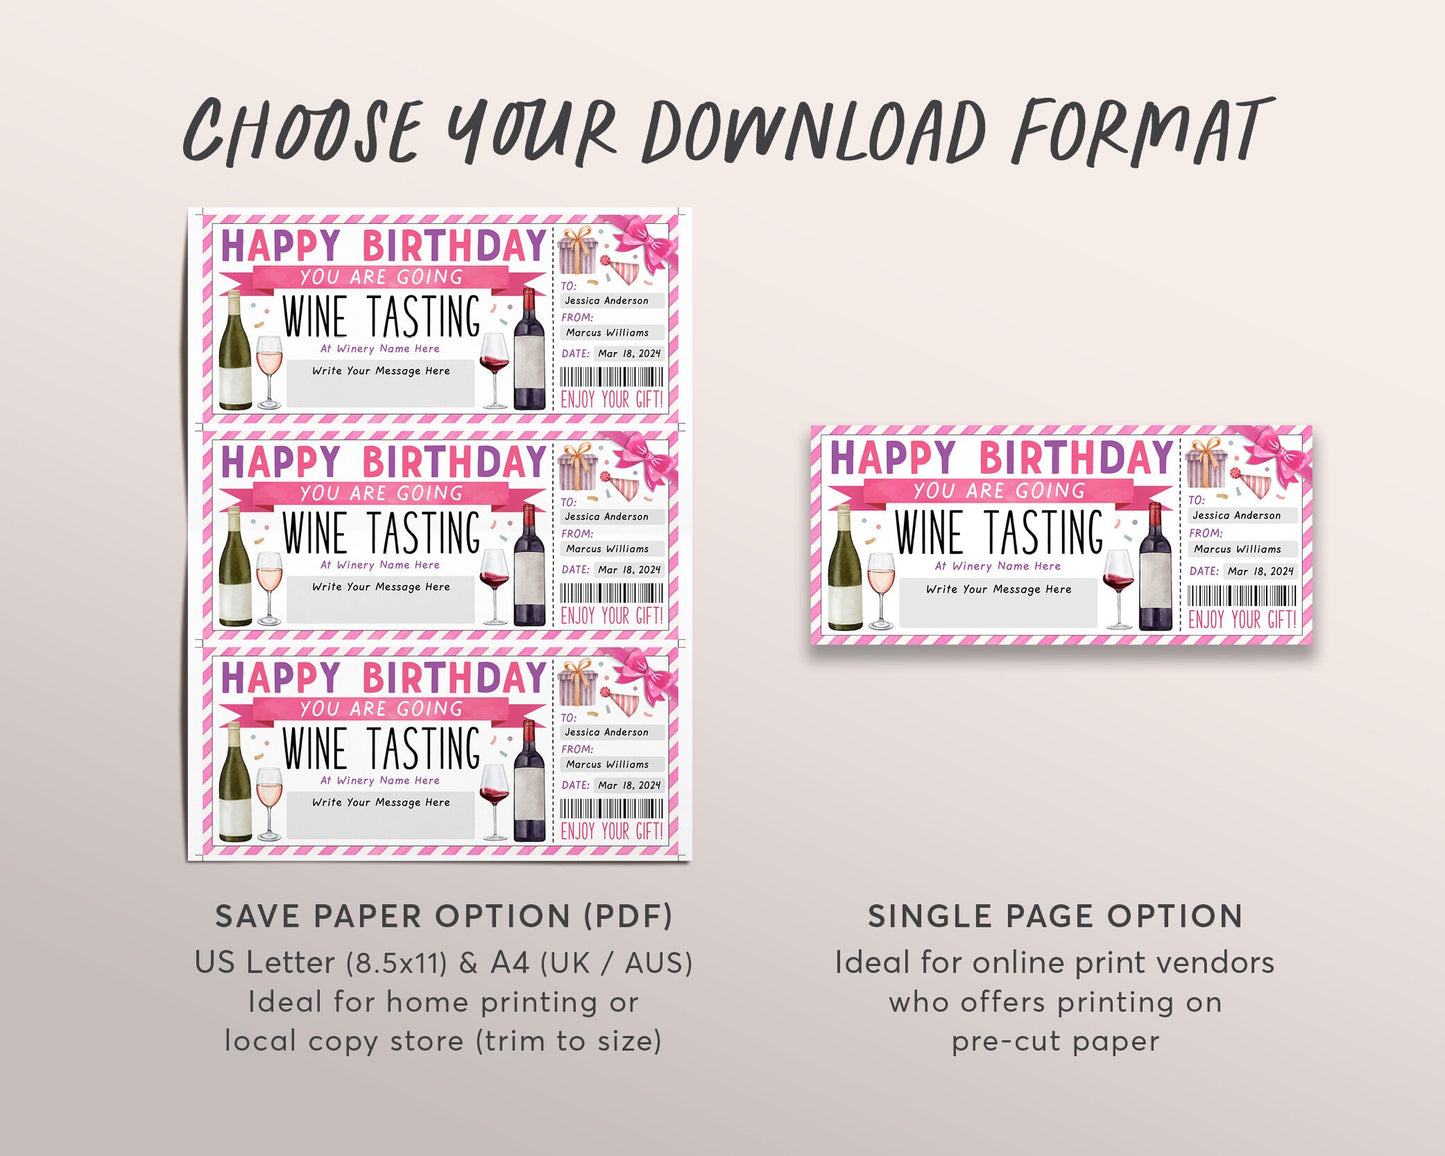 Wine Tasting Gift Voucher Editable Template, Birthday Surprise Wine Tasting Ticket Gift Certificate For Her, Winery Vineyard Coupon Reveal